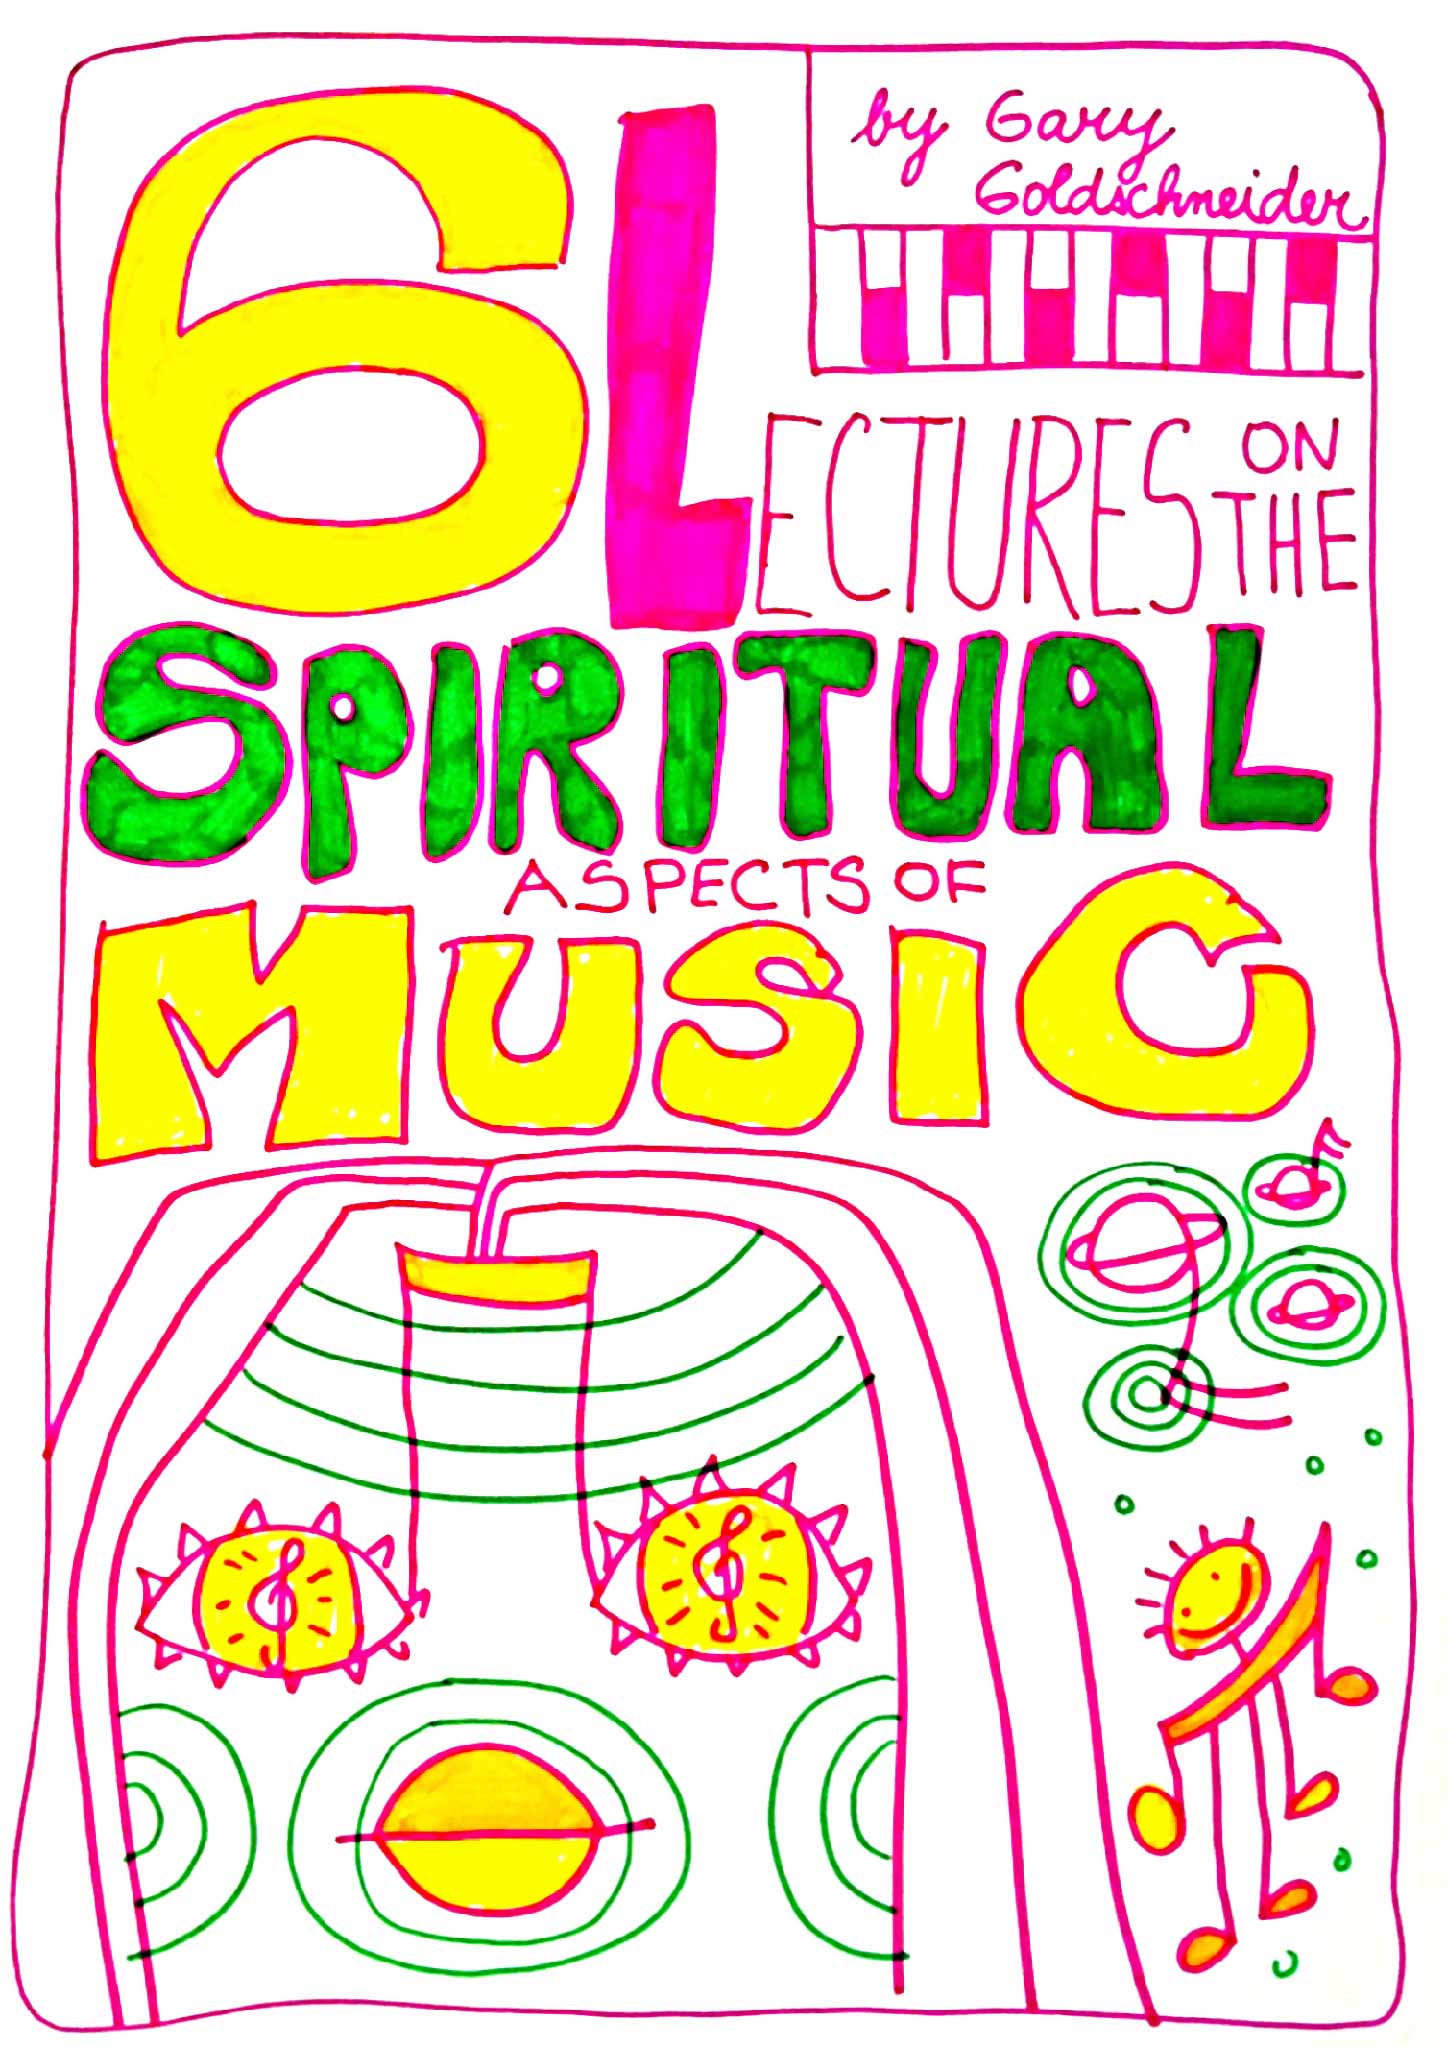 "6 Lectures on the Spiritual Aspects of Music" by Gary Goldshcneider cover by LuLu Lightning